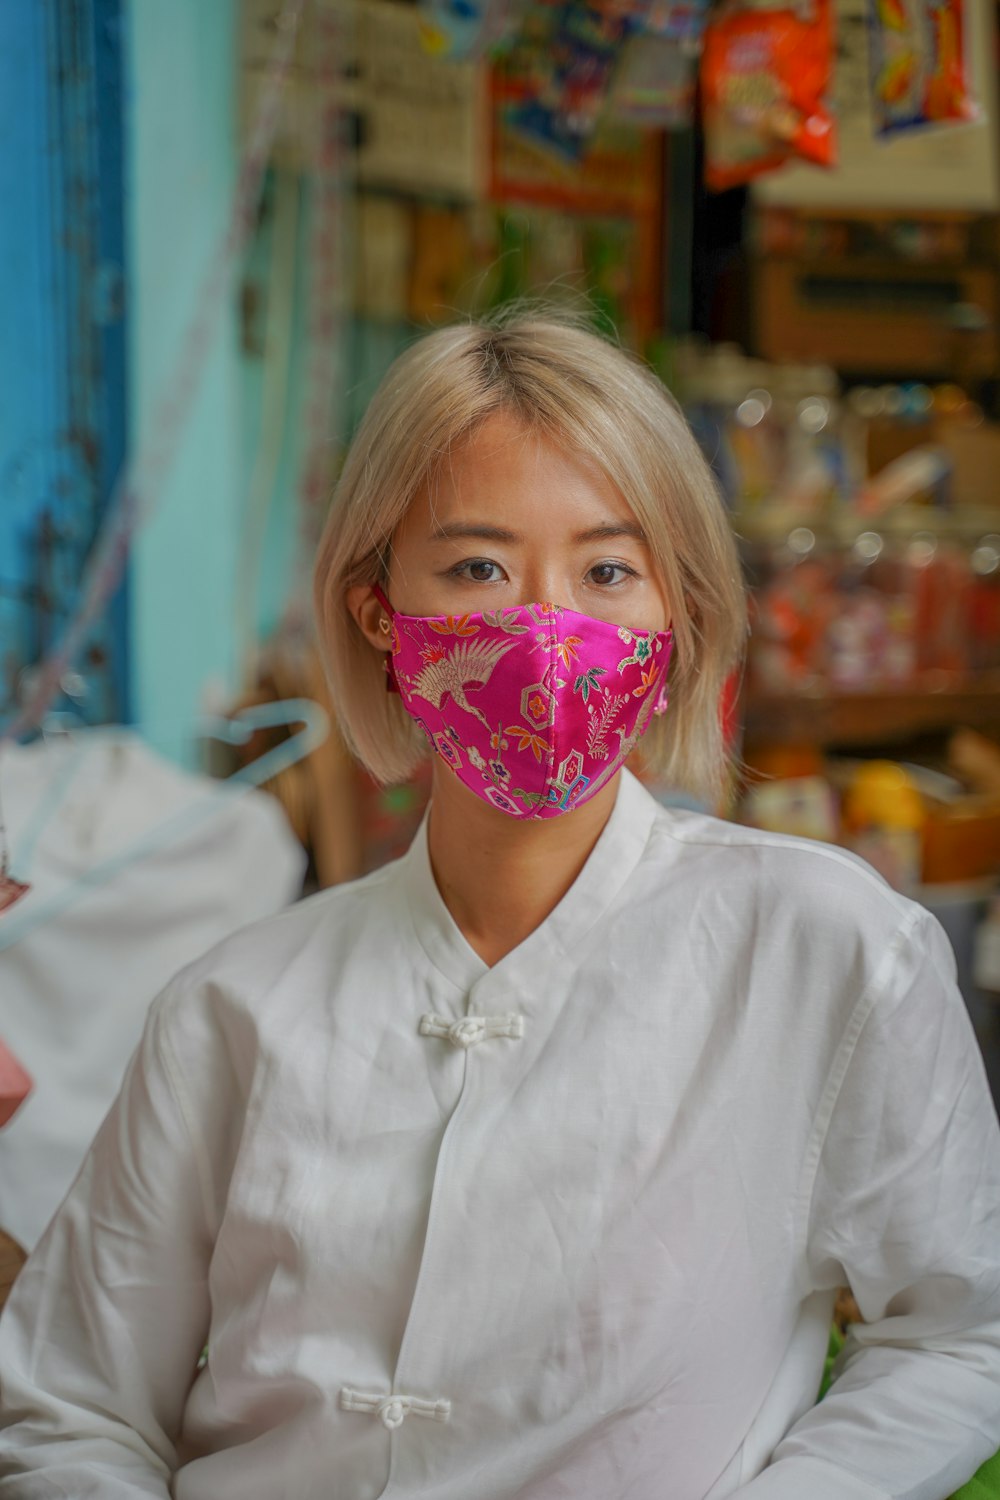 girl in white button up shirt with pink and white floral mask